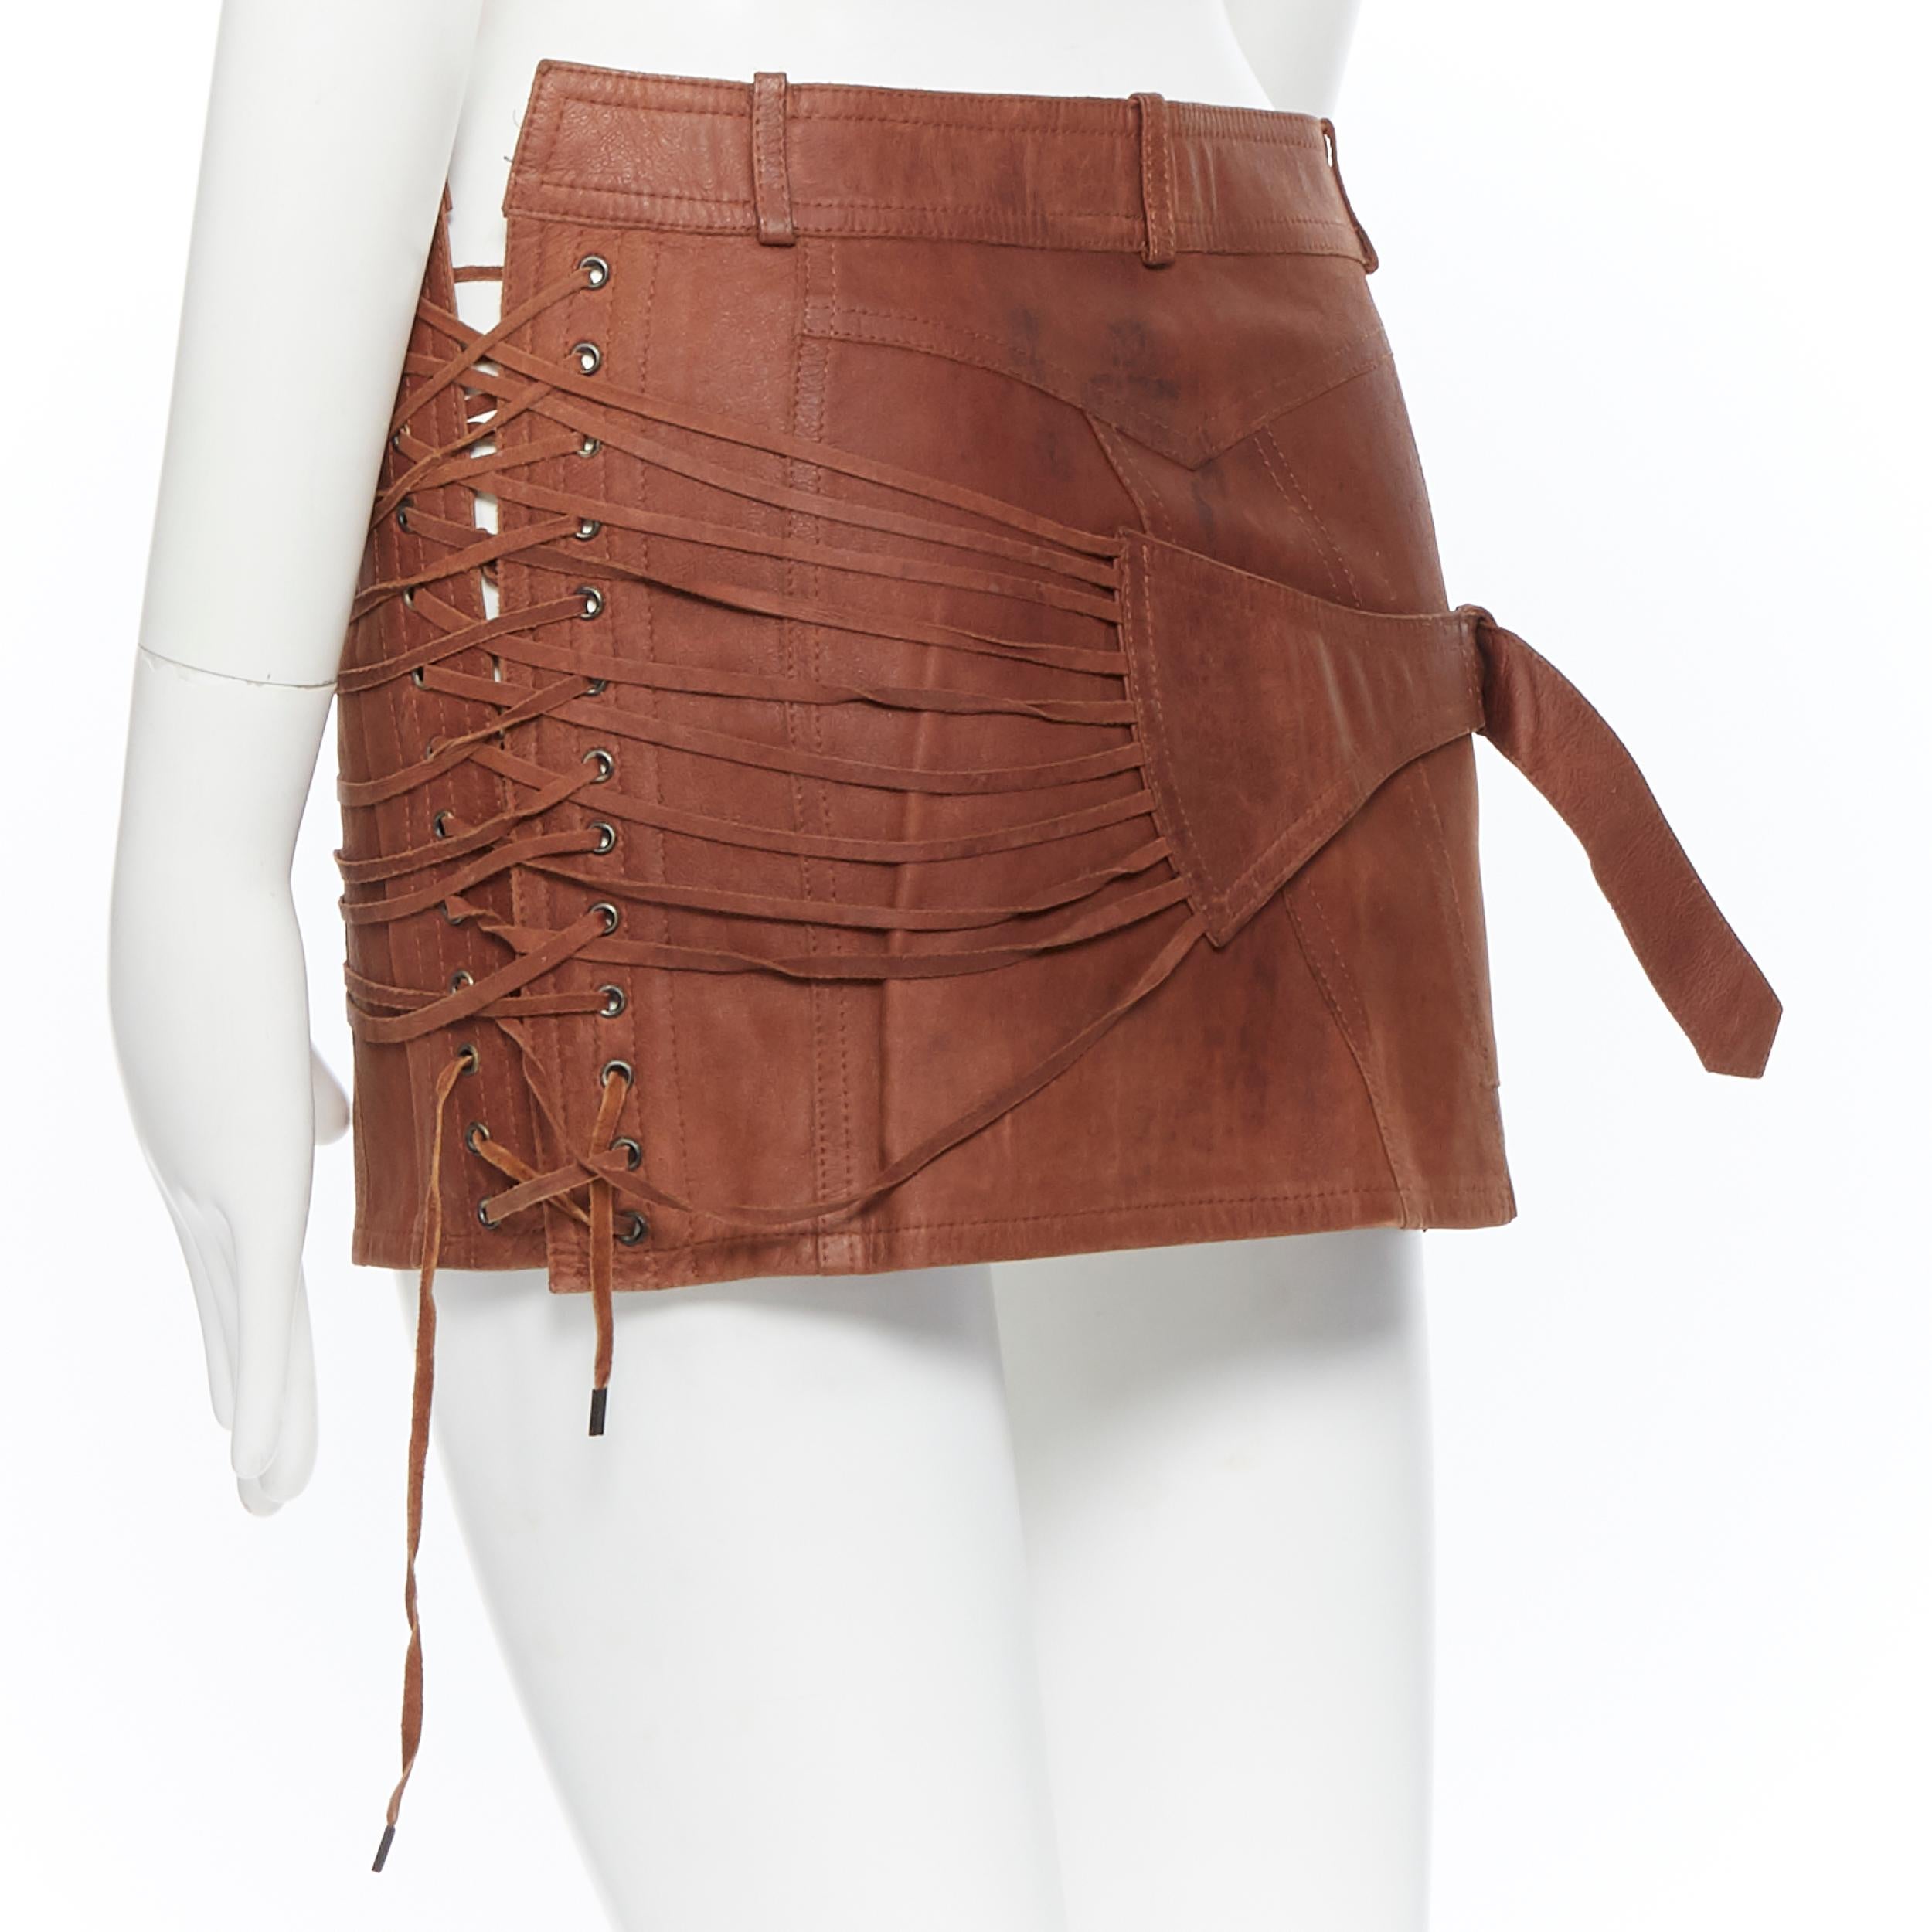 Women's vintage CHRISTIAN DIOR Galliano brown leather strappy buckle mini skirt FR38